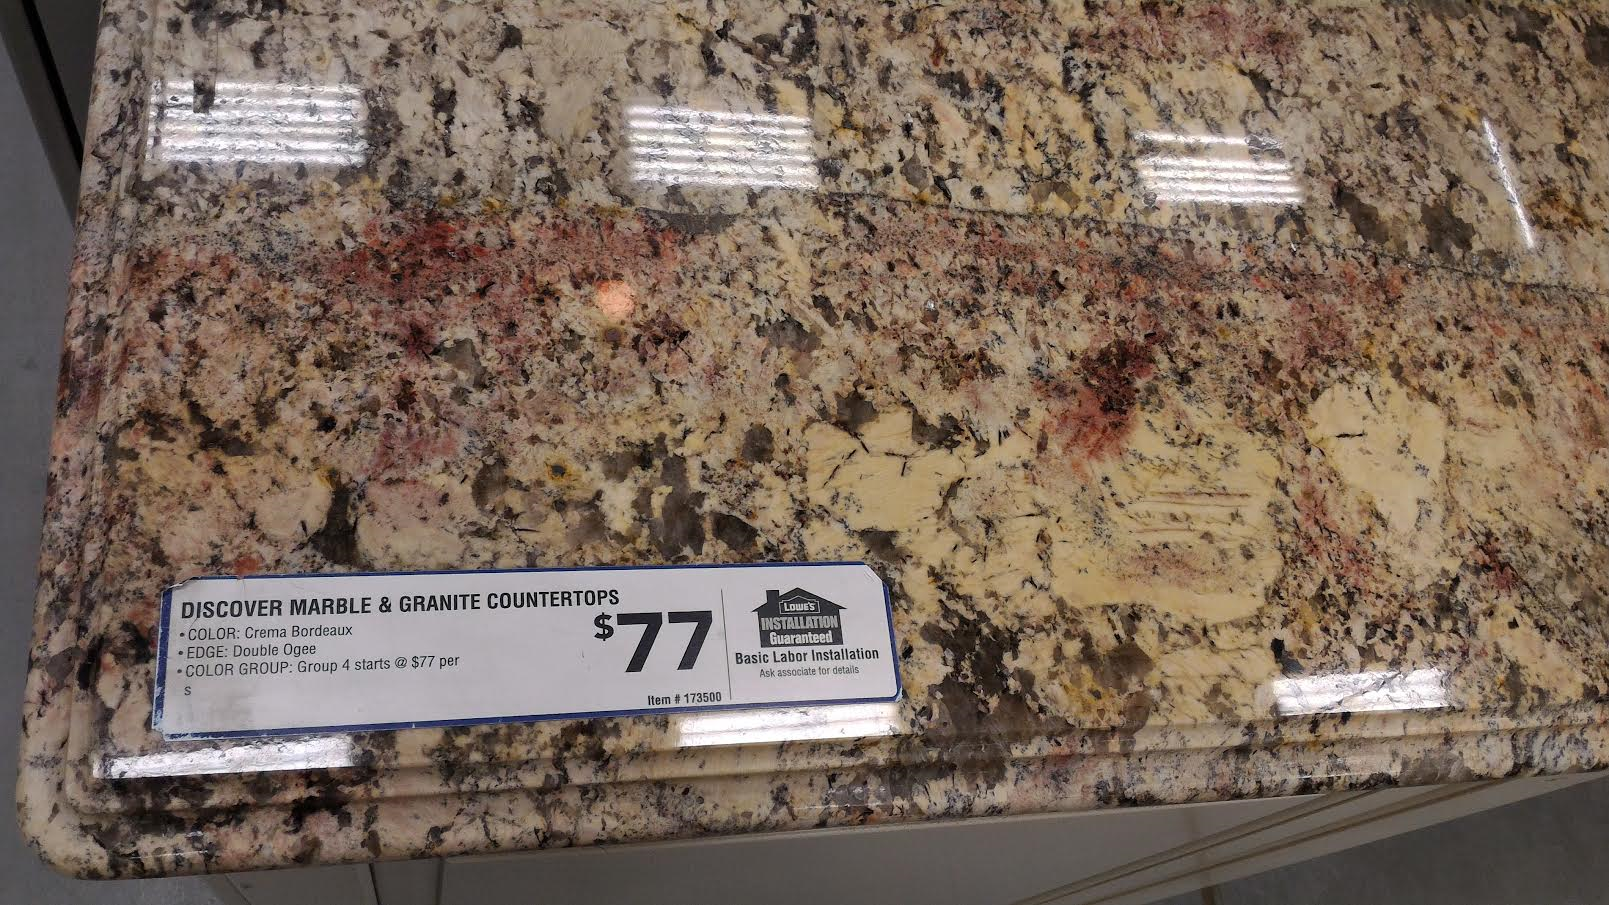 Top 10 Countertops Prices Pros Cons In 2020 Countertop Costs,Mosslanda Picture Ledge Black 45 14